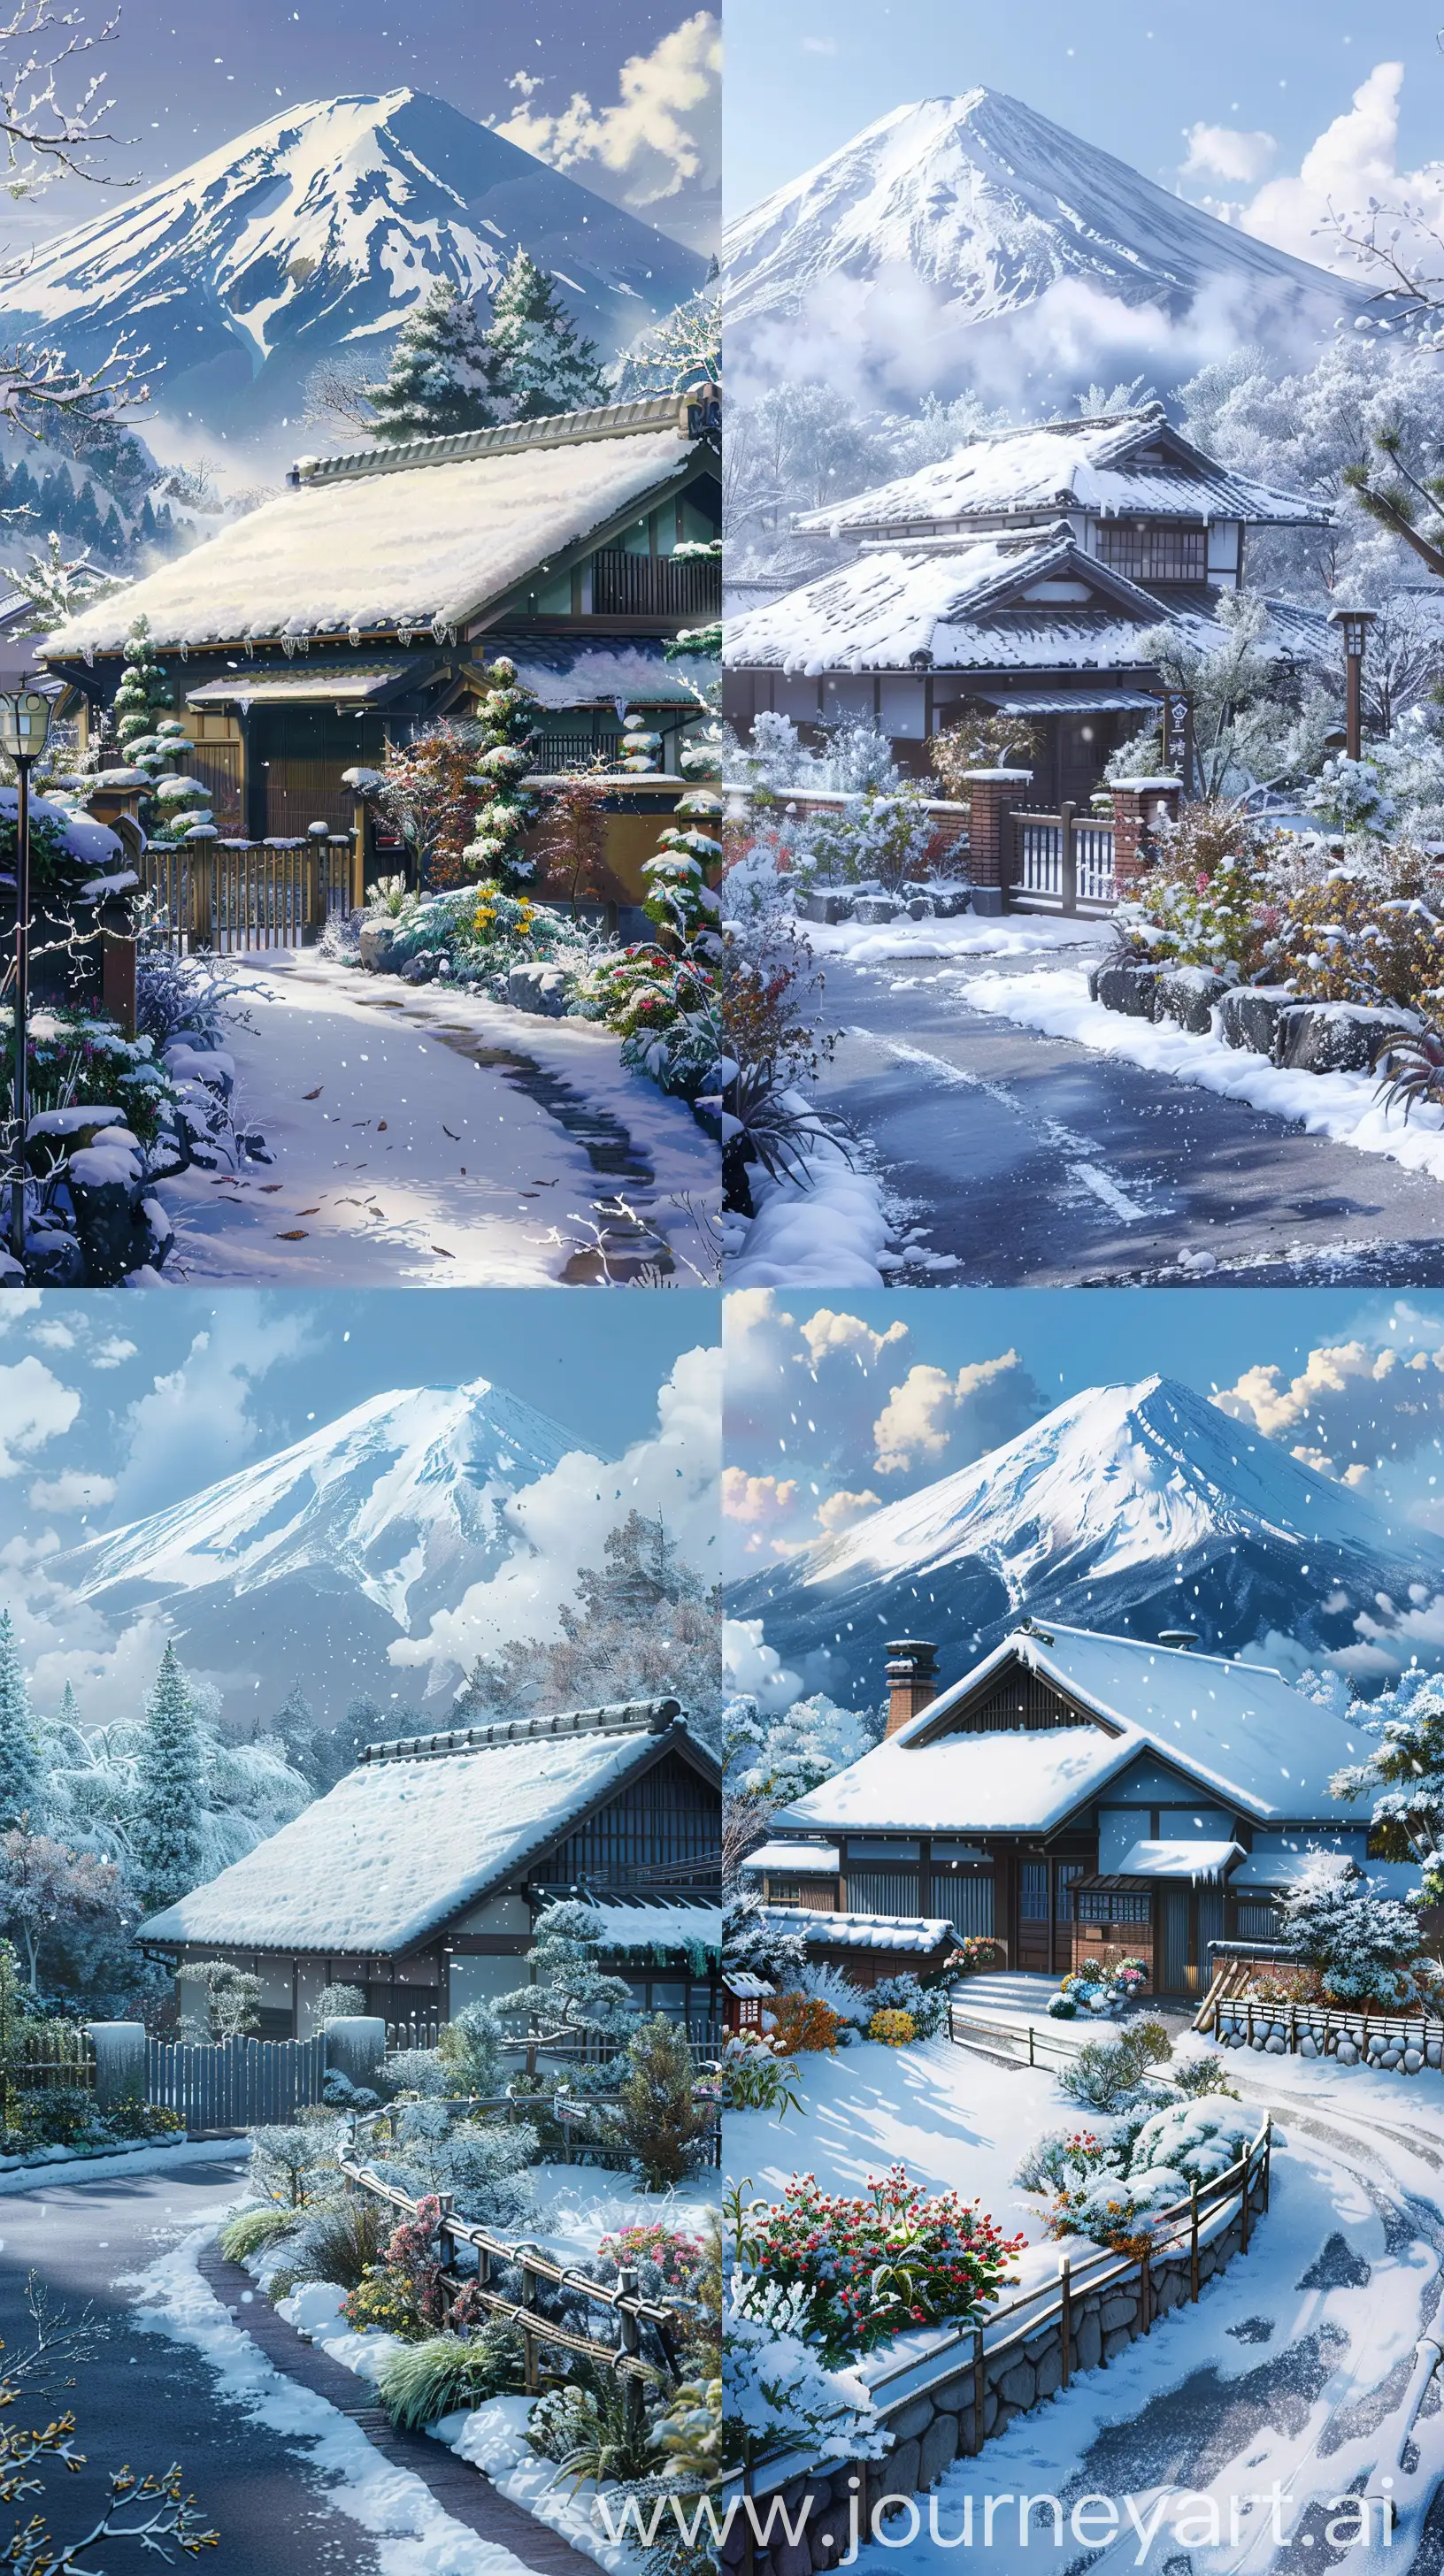 Snowy-Ghibli-Style-Anime-House-Surrounded-by-Serene-Winter-Landscape